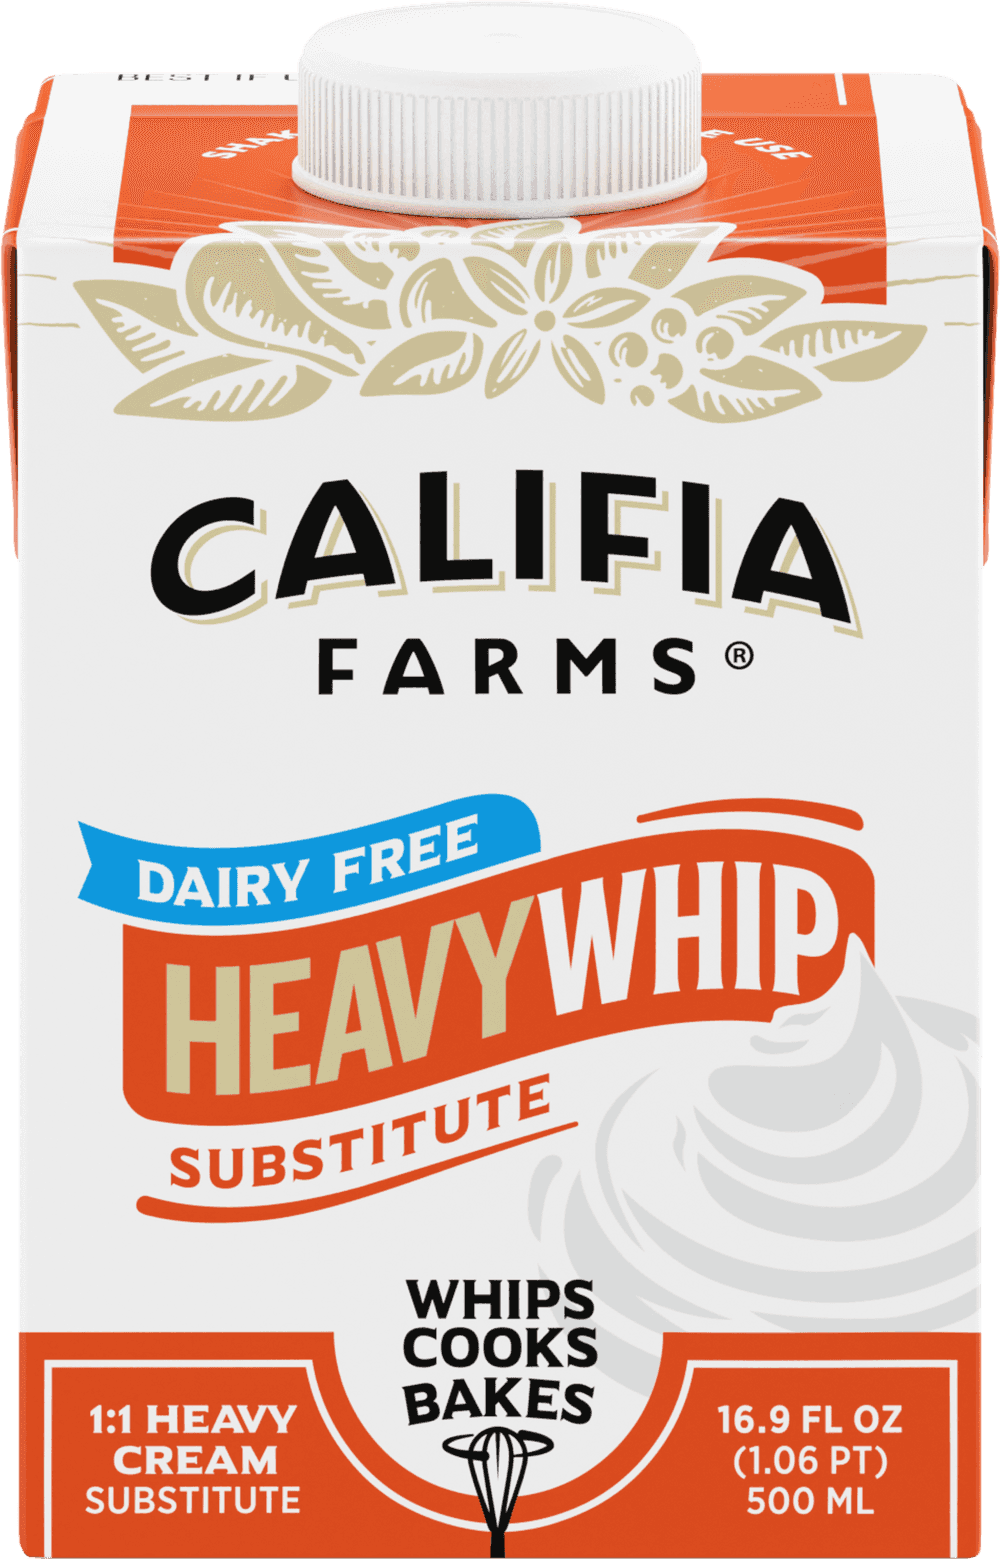 Is Cool Whip Dairy Free? Non-Dairy Substitutes for Cool Whip